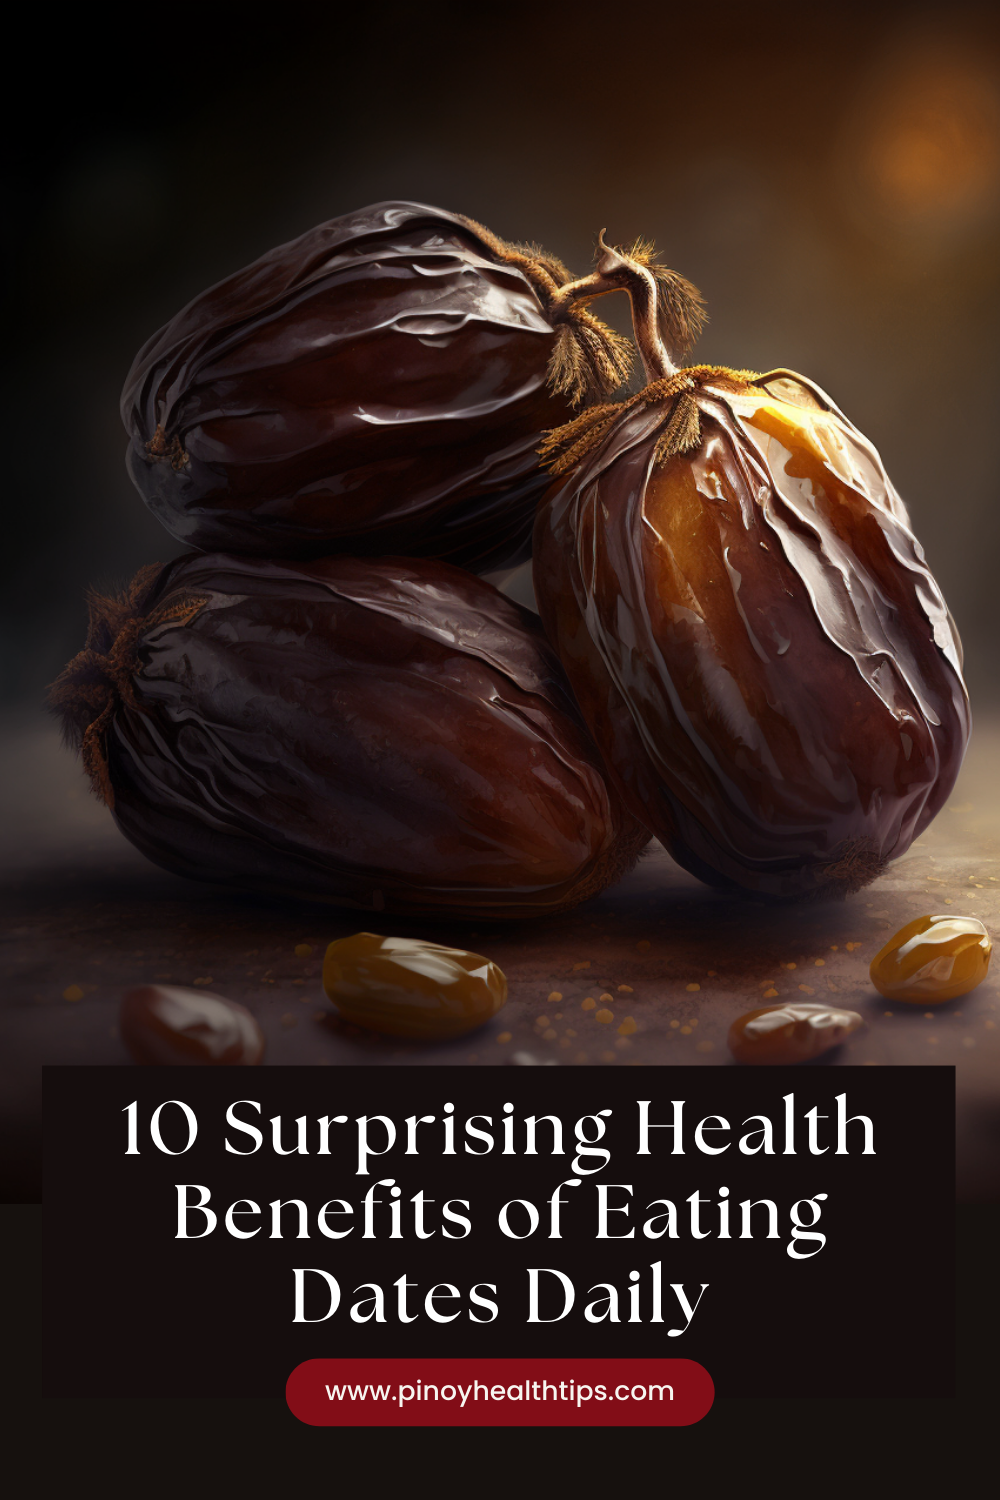 10 Surprising Health Benefits of Eating Dates Daily